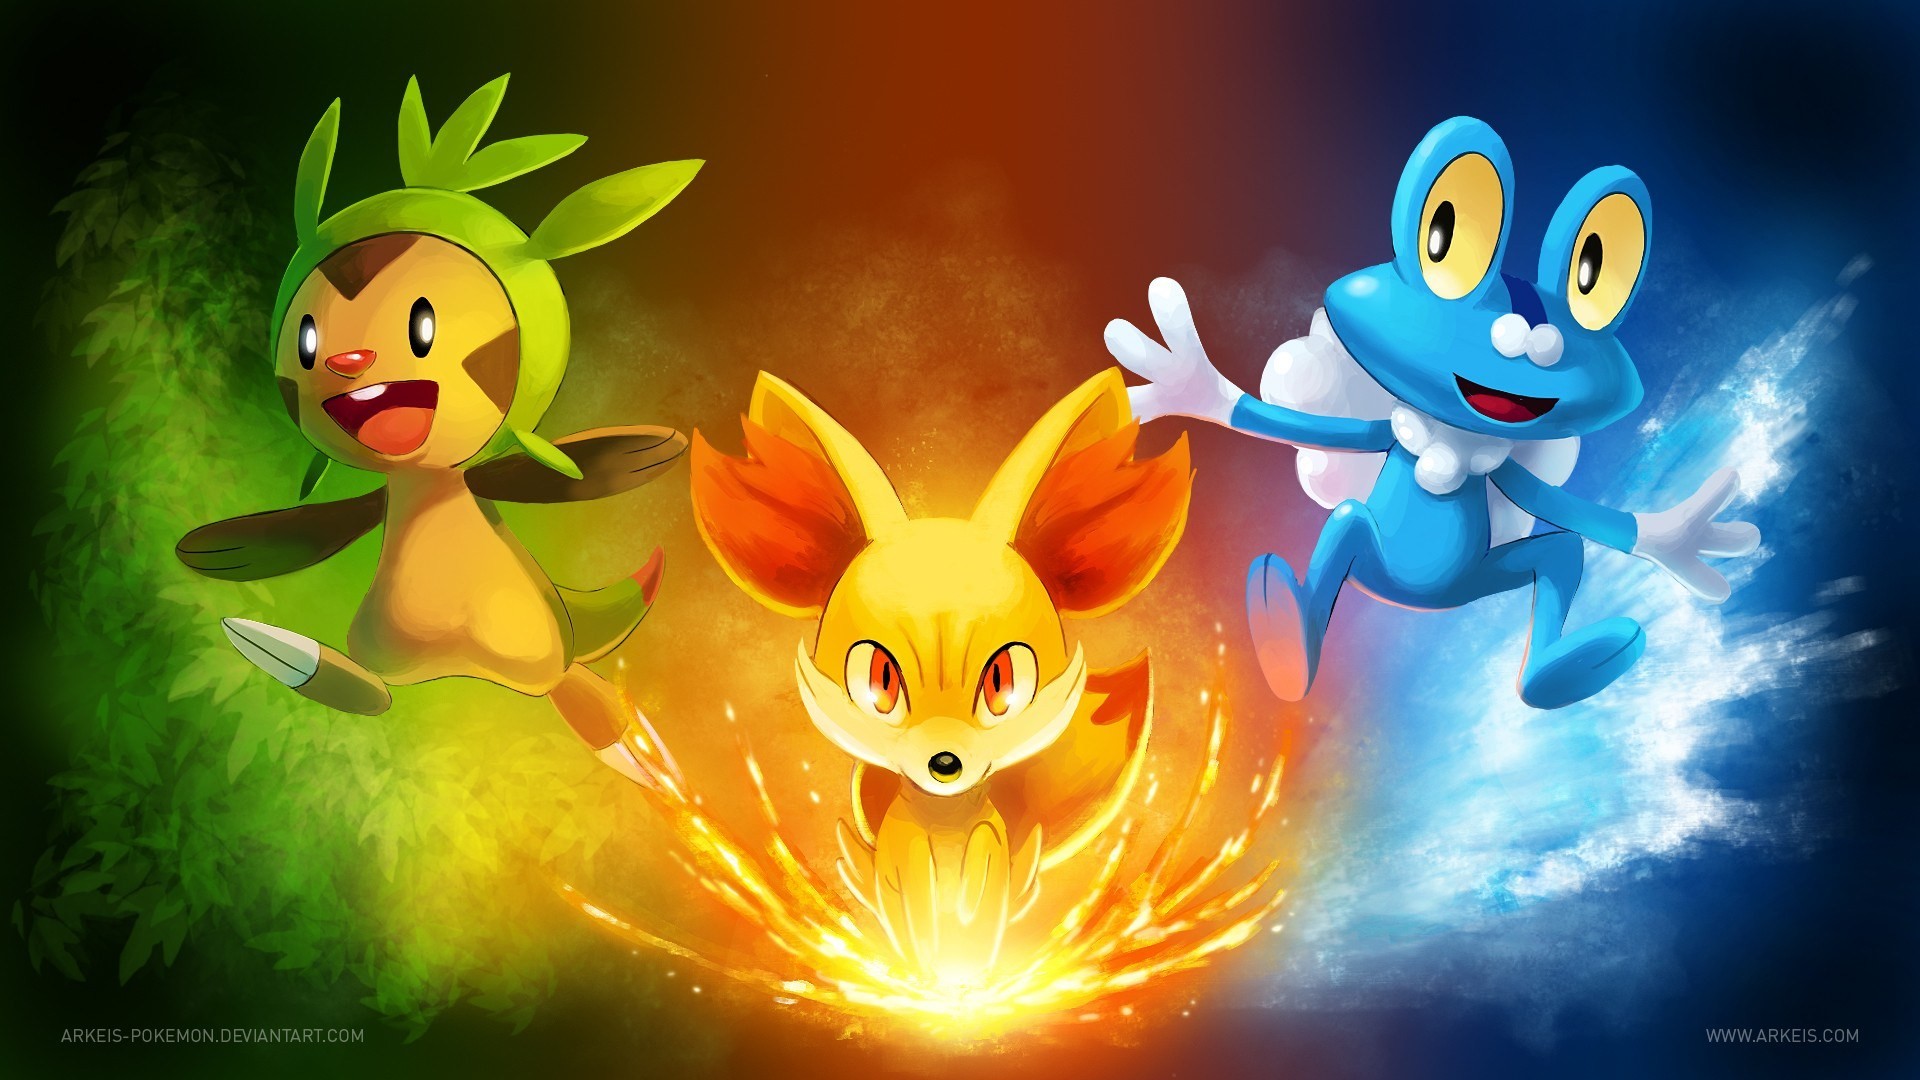 Great Cute Pokemon Wallpaper Free Wallpaper For Desktop and Mobile in All Resolutions Free Download 3d